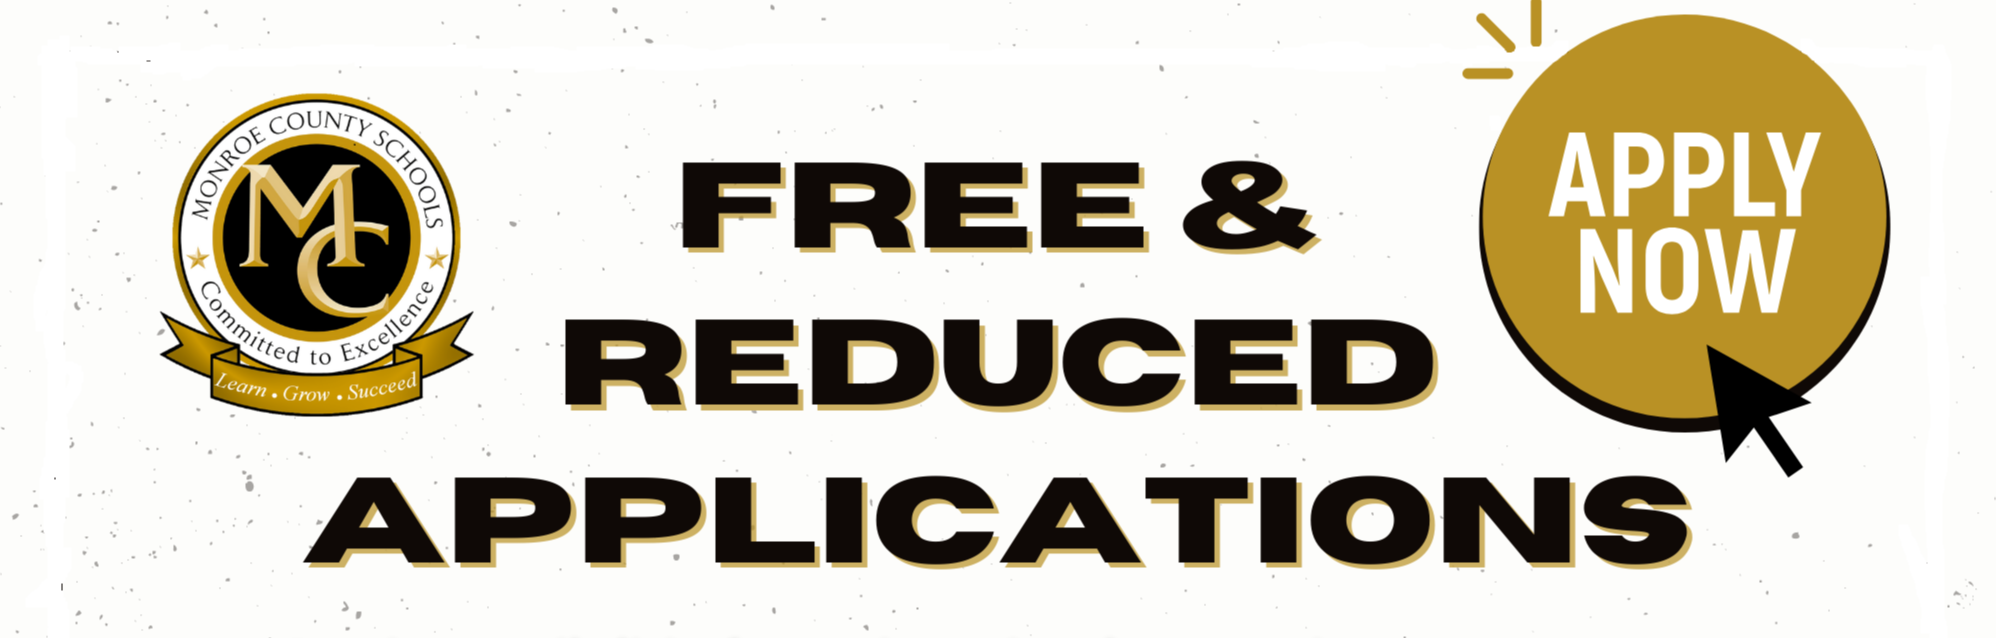 Free and reduced applications